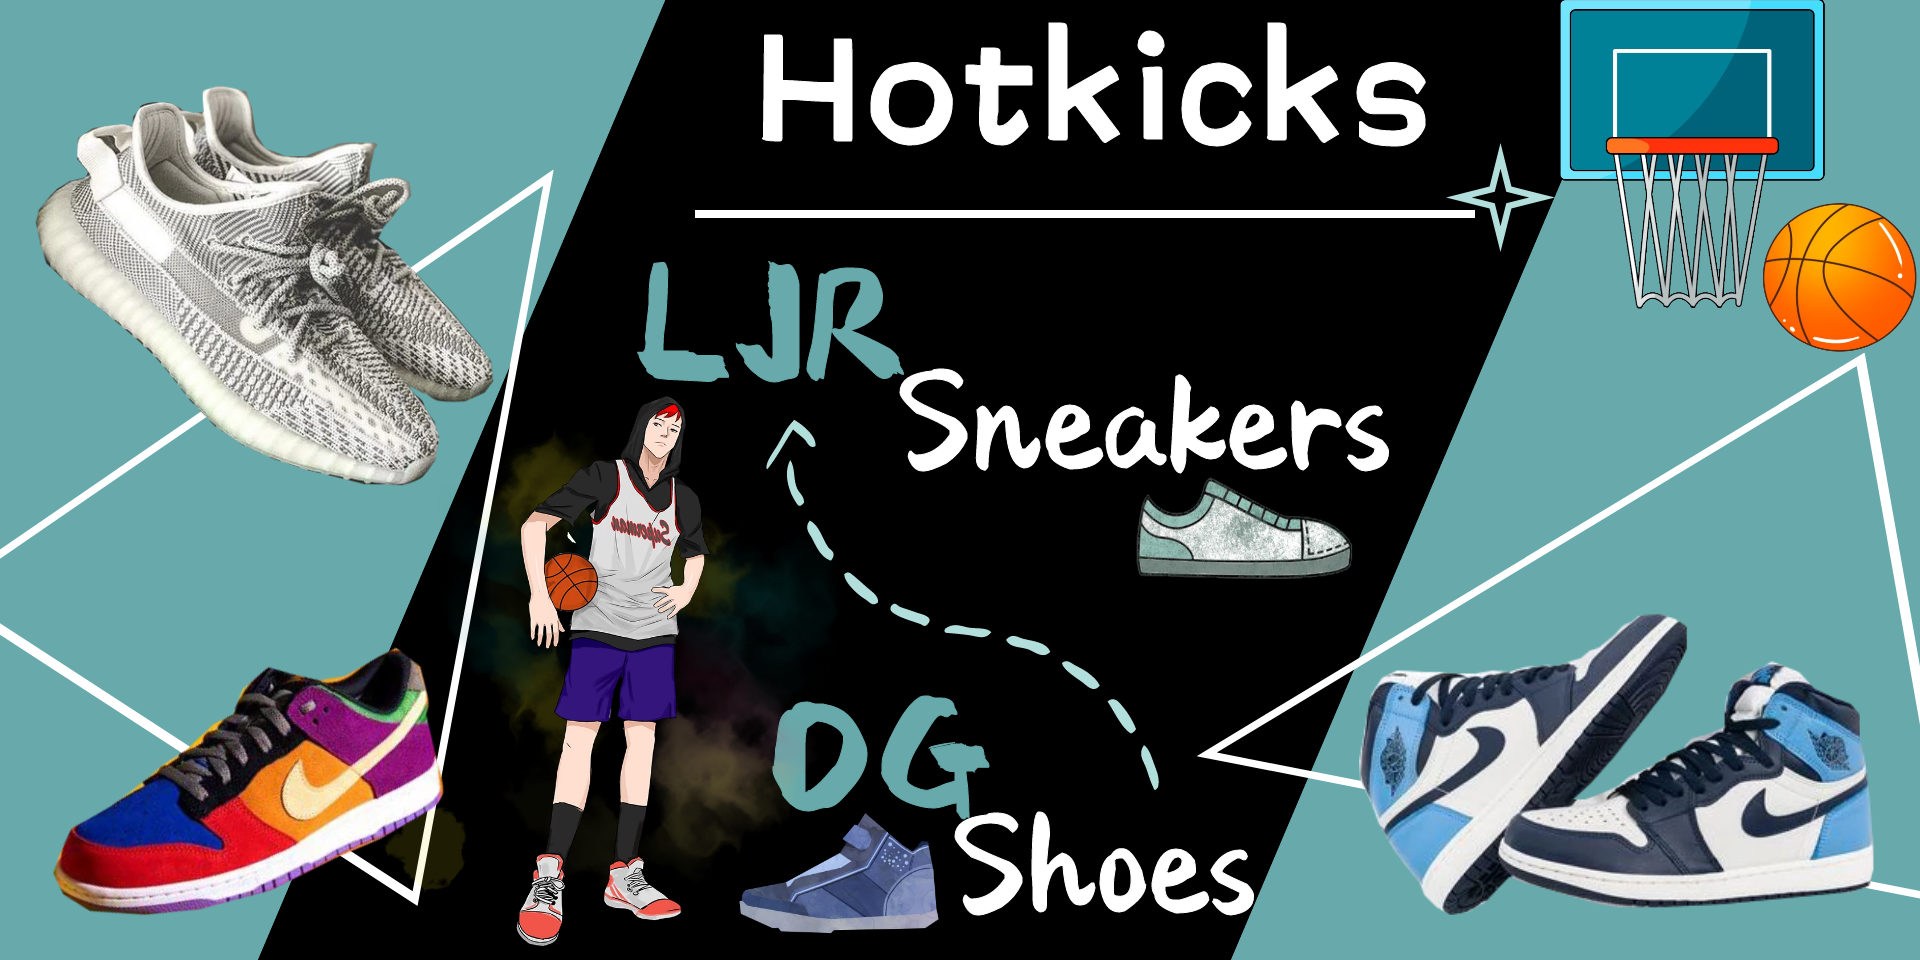 Where to buy Hot shoes